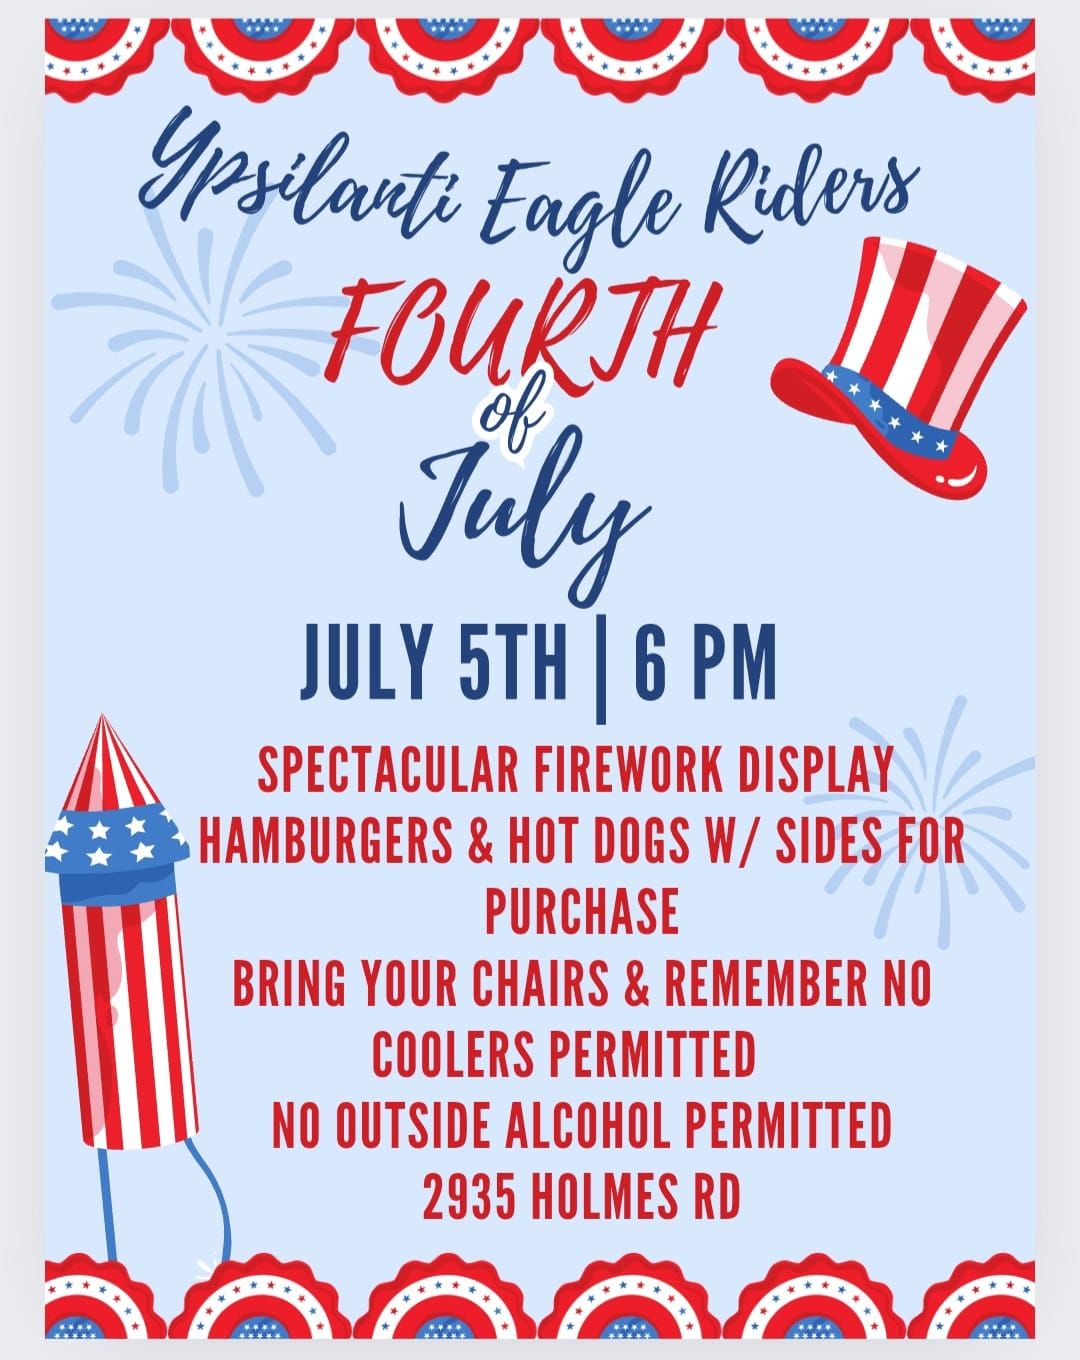 Eagle Riders 4th of July Fireworks